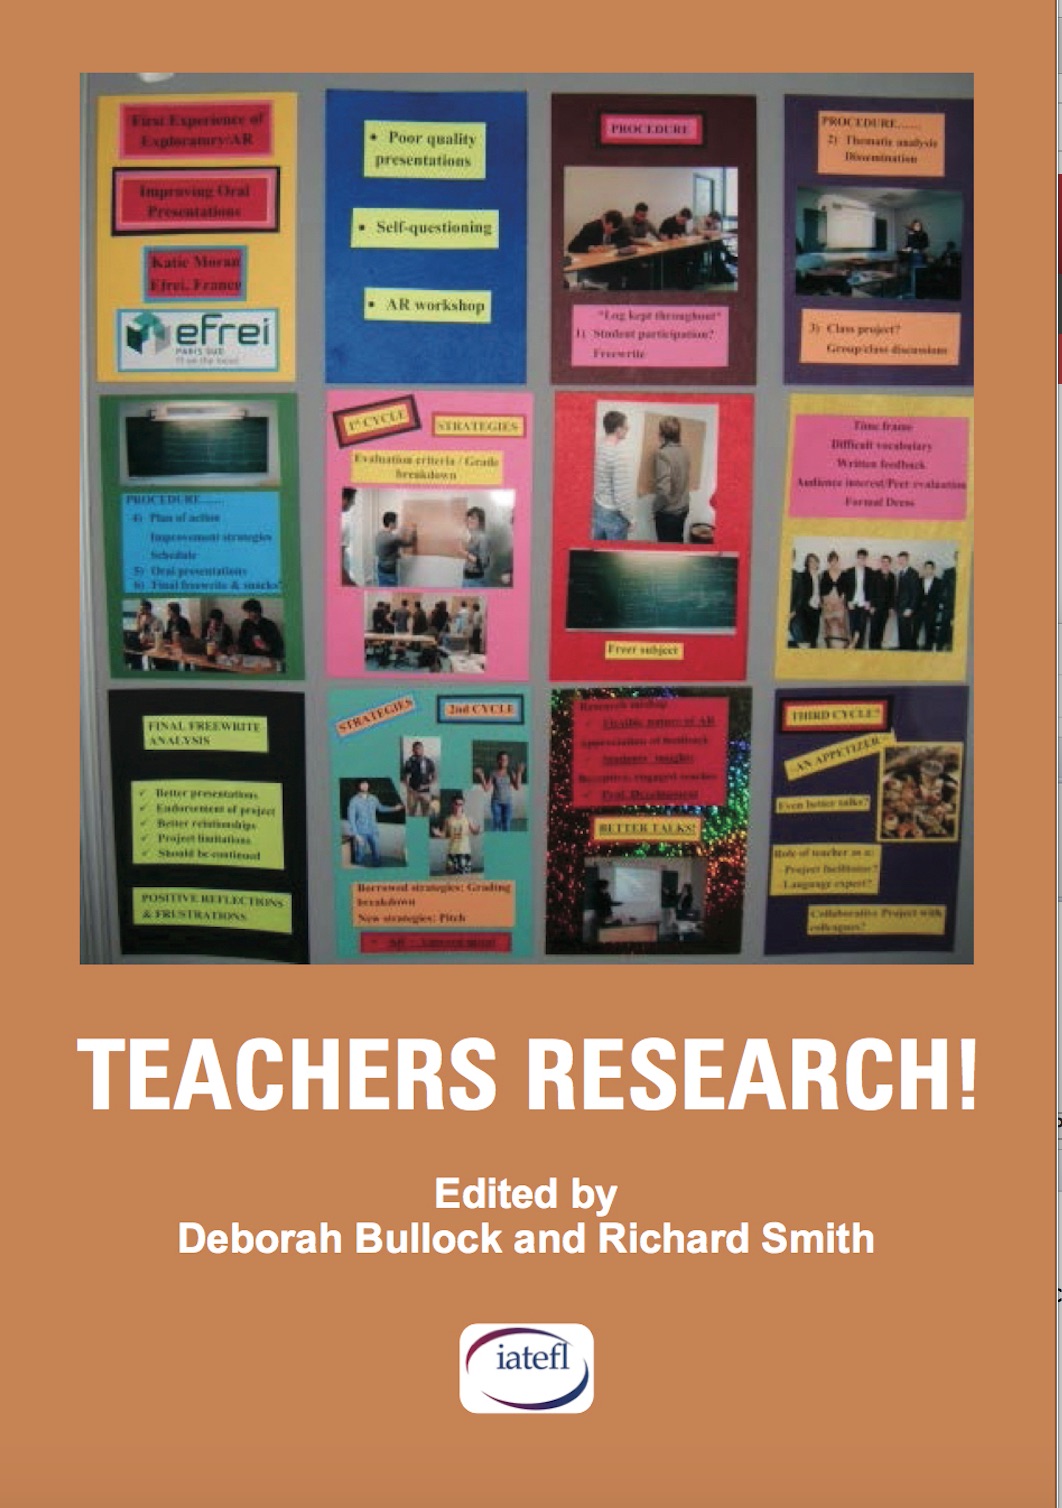 teachers_research_front_cover.jpg